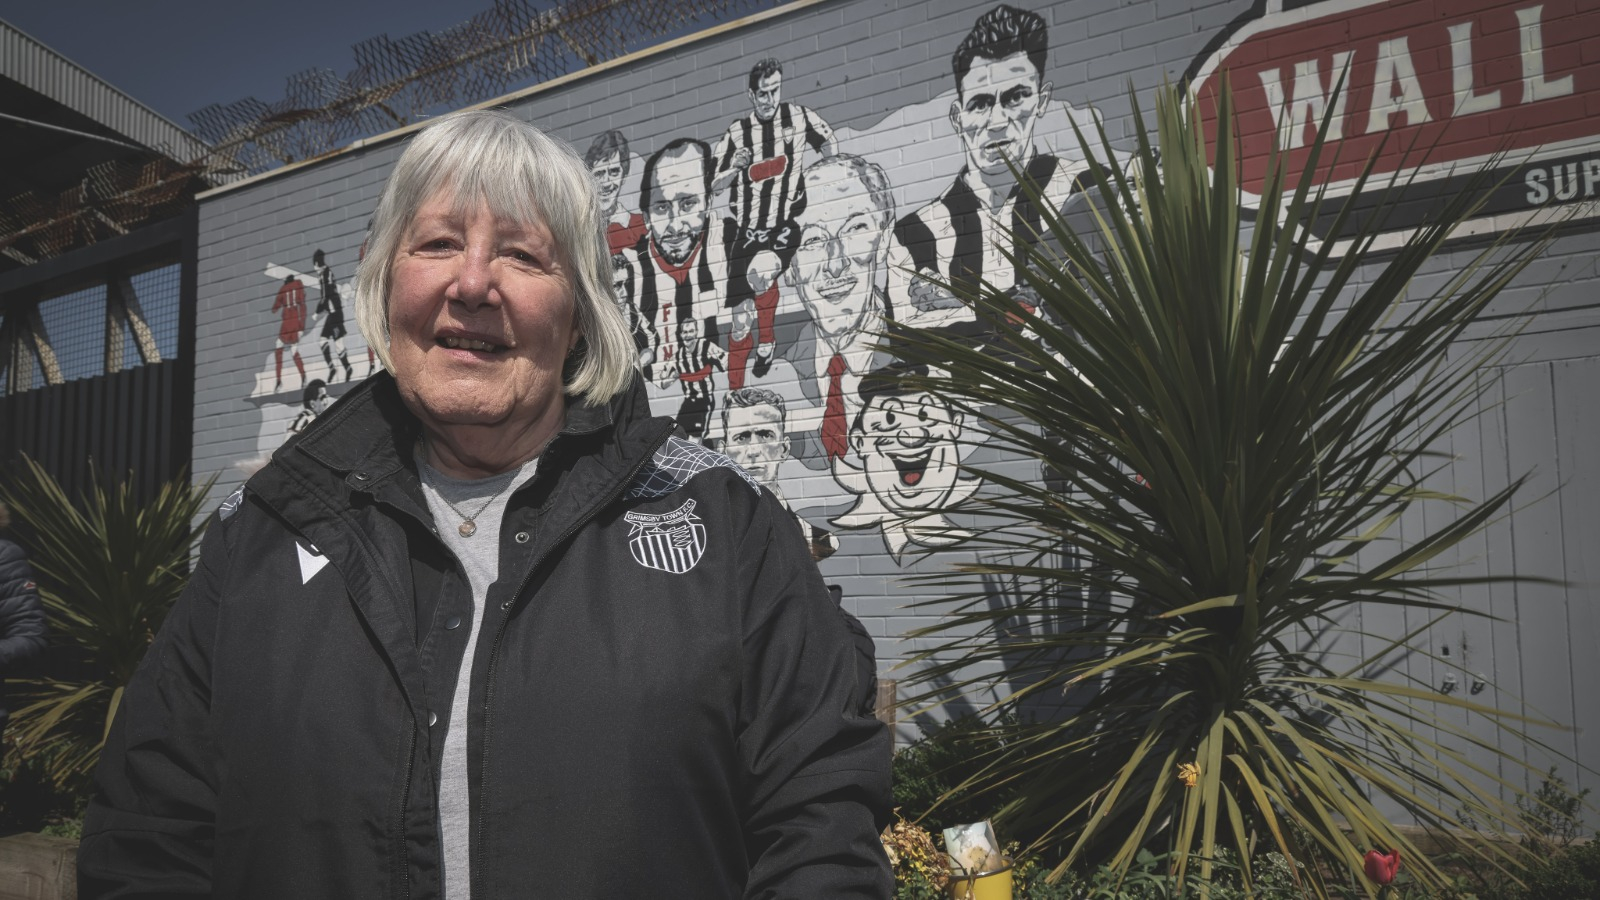 Jean outside The Mariners wall